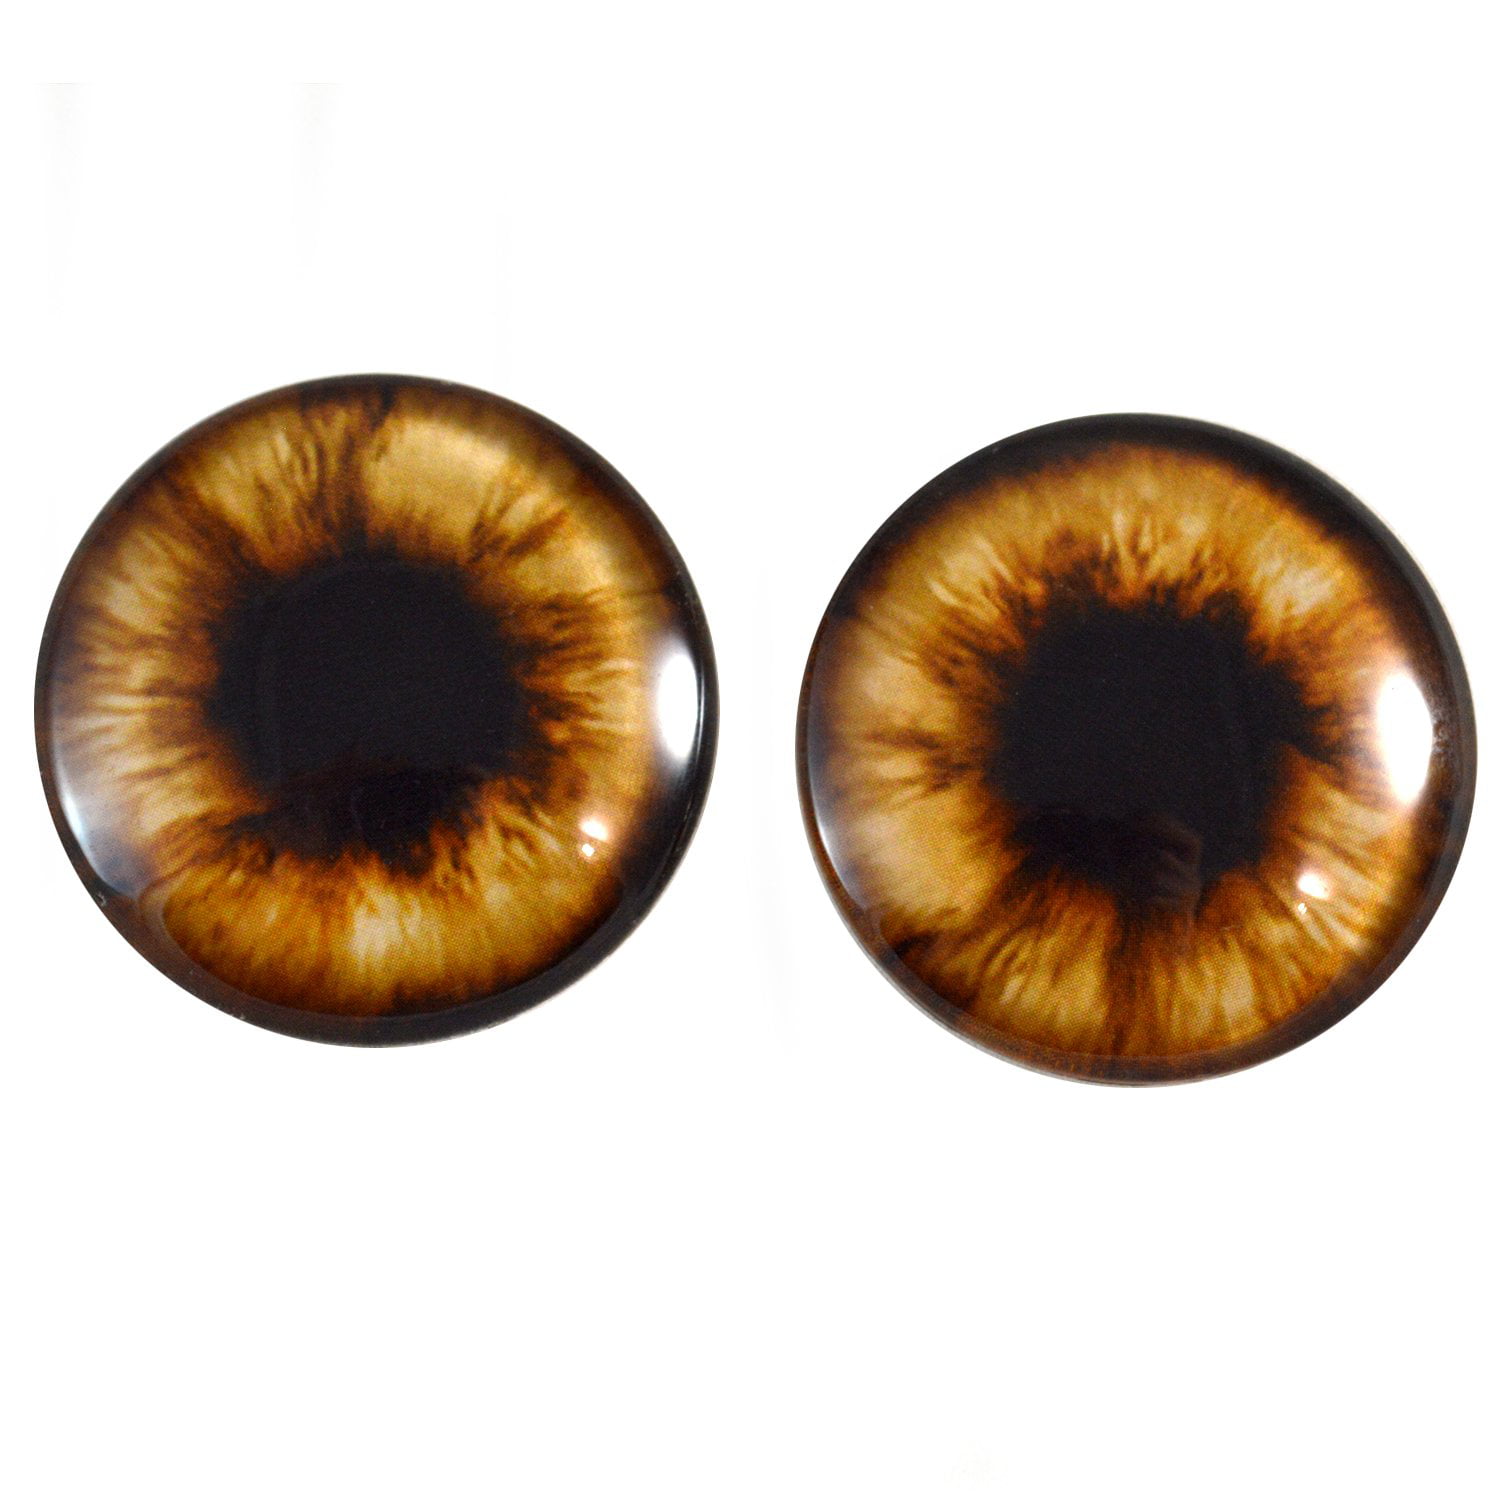 a pair vintage solid Glass Eyes size 7 mm teady bear taxidermy age 1910 Art A62 